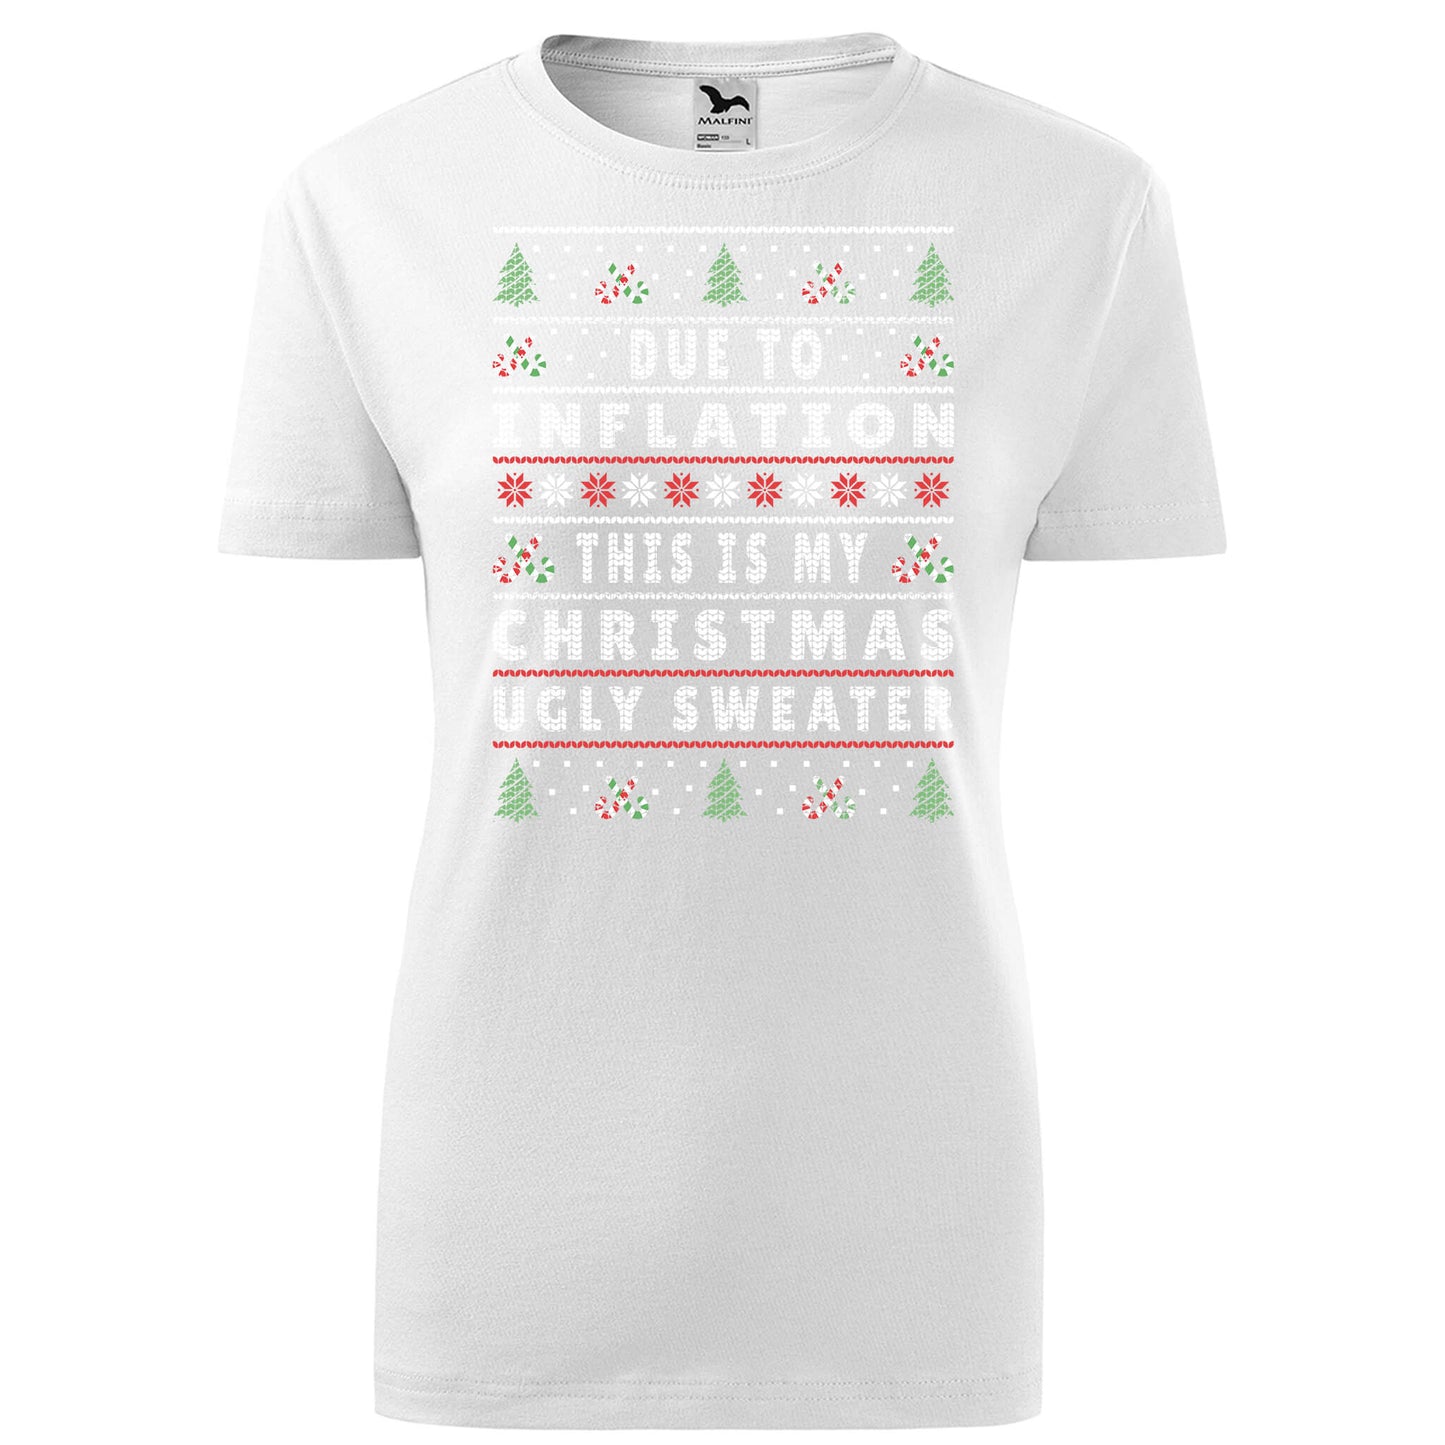 Due to inflation this is my christmas ugly sweater t-shirt - rvdesignprint